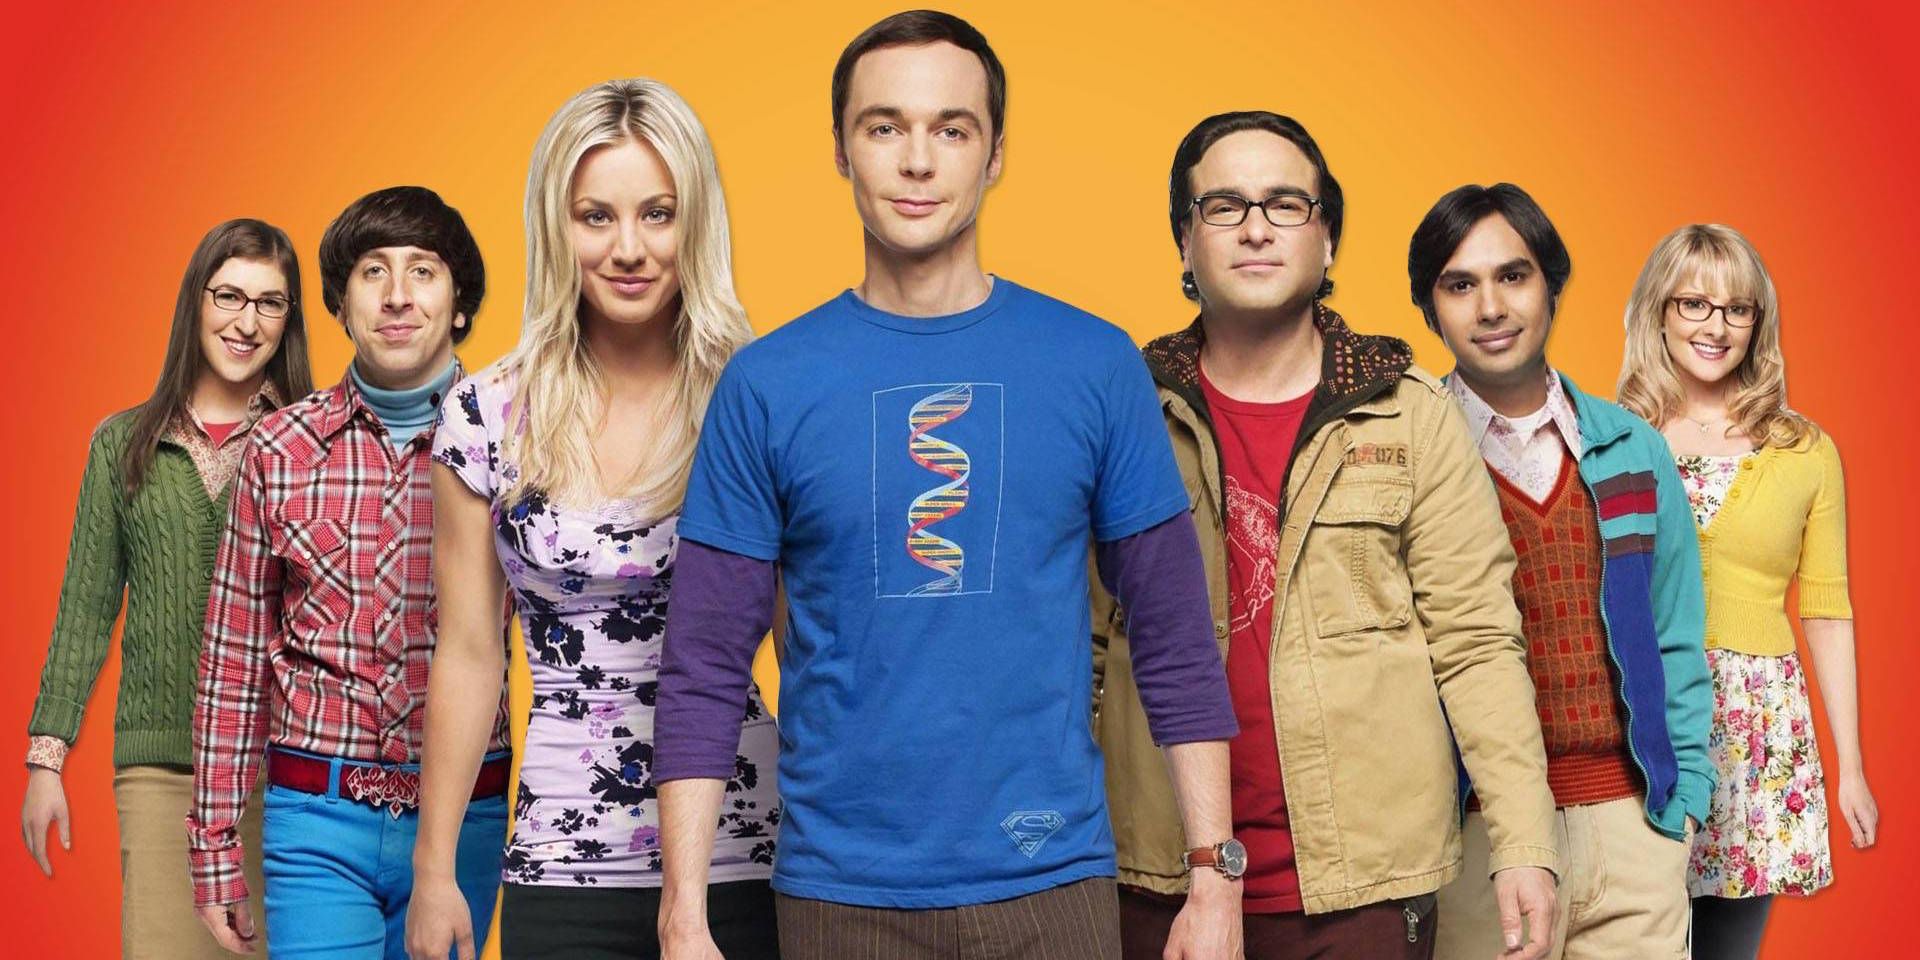 The cast of The Big Bang Theory in a promo image for the show.